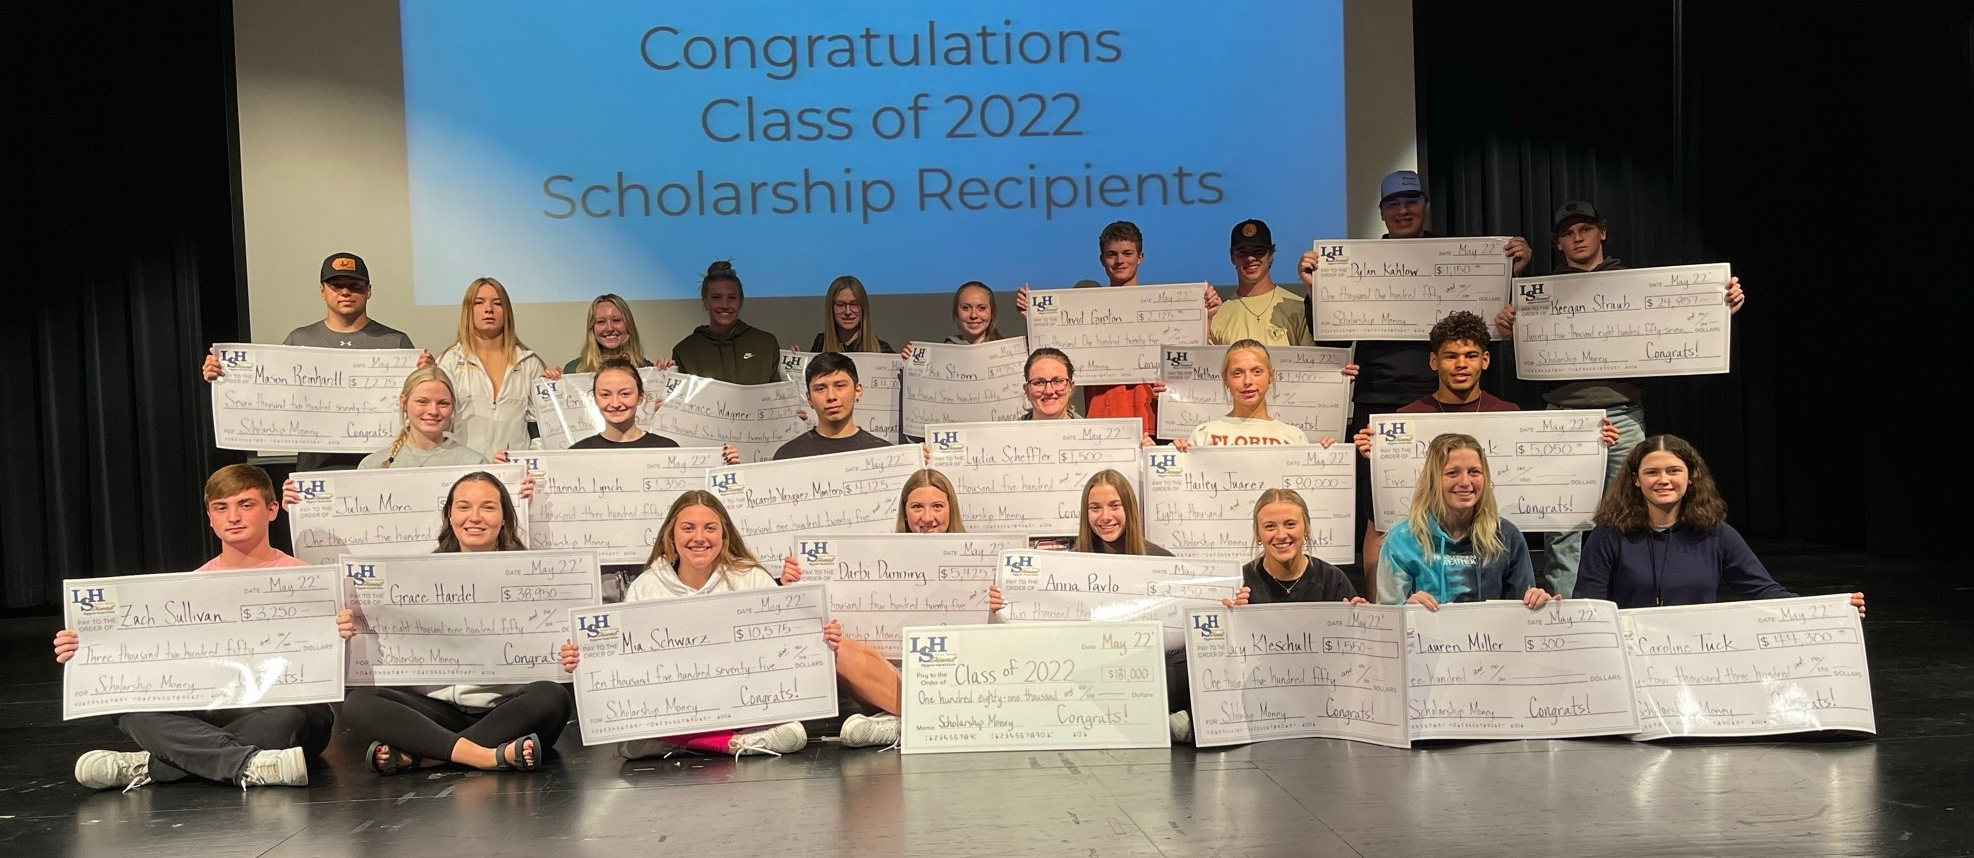 Congratulations Class of 2022! Scholarship recipients received $180,000 in Local Scholarships! 